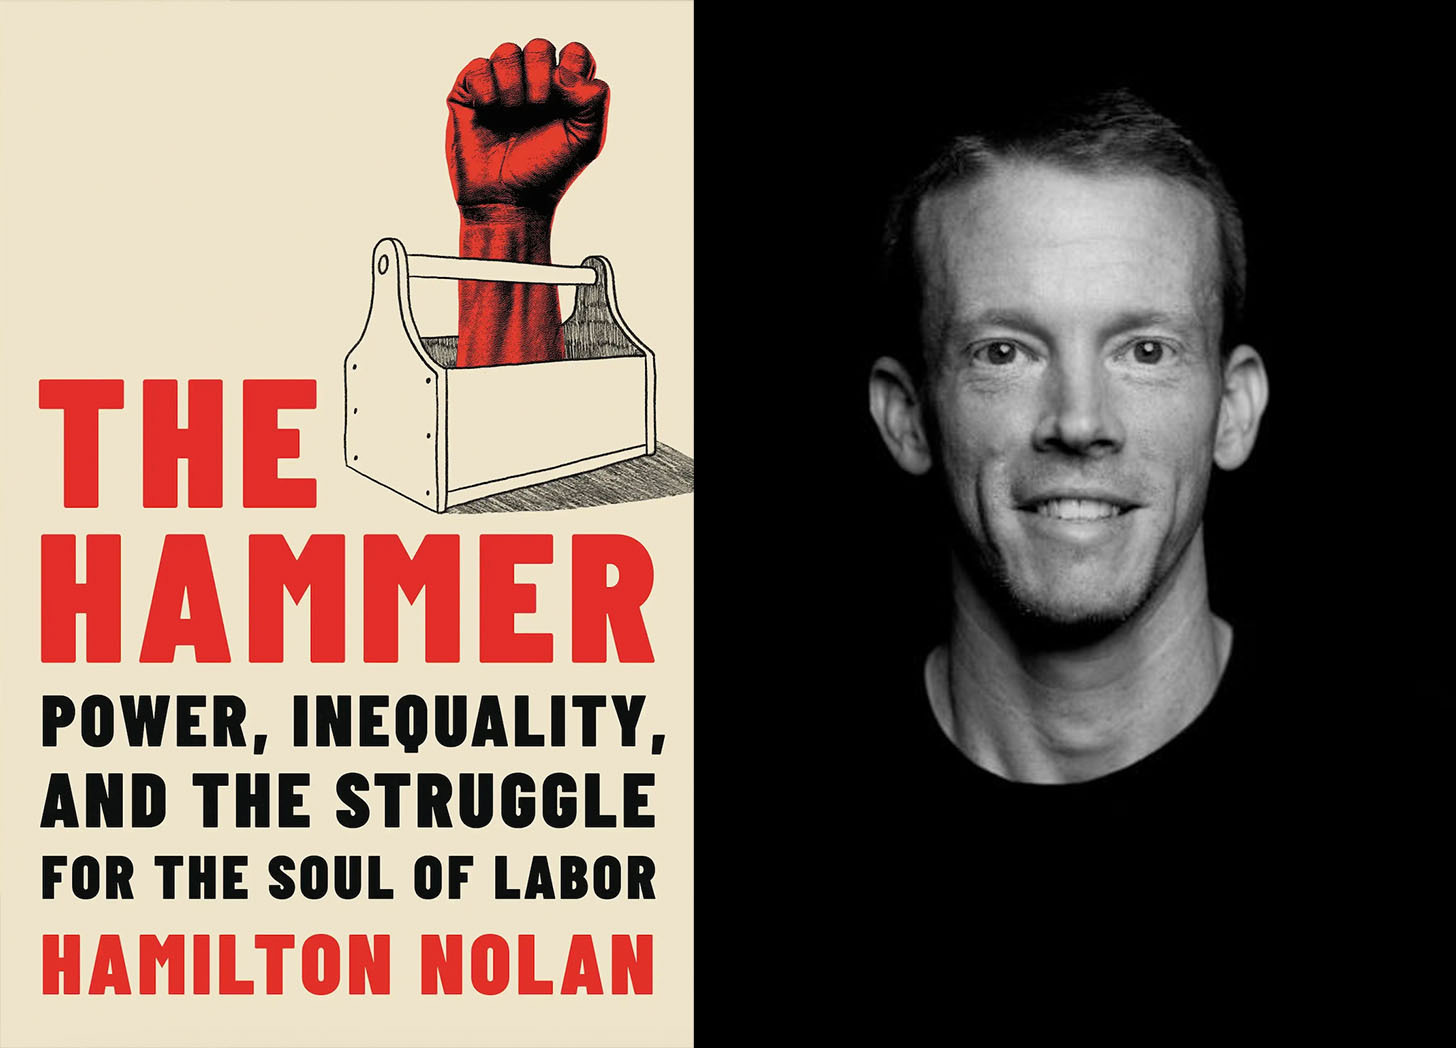 On the left is the cover of The Hammer: Power, Inequality, and the Struggle for the Soul of Labor by Hamilton Nolan, which features a red raised fist inside a beige tool box. To the right is a black-and-white portrait of Nolan.